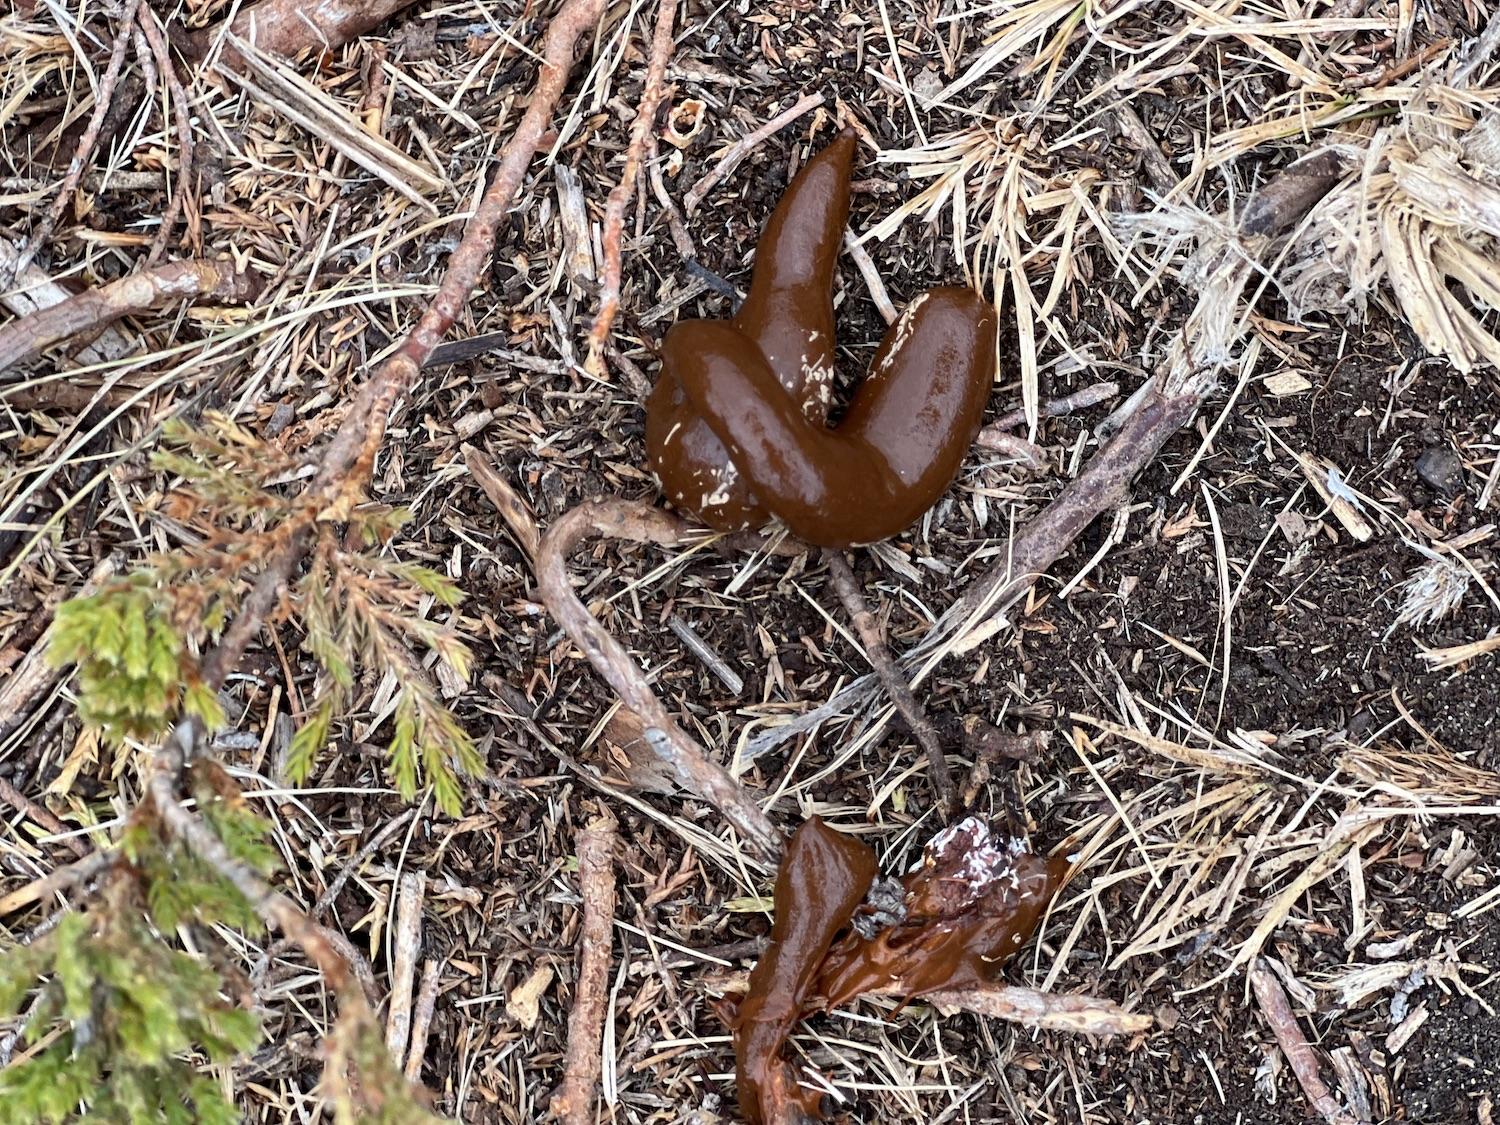 There's plenty of wildlife scat, some of it fresh, along the trail.